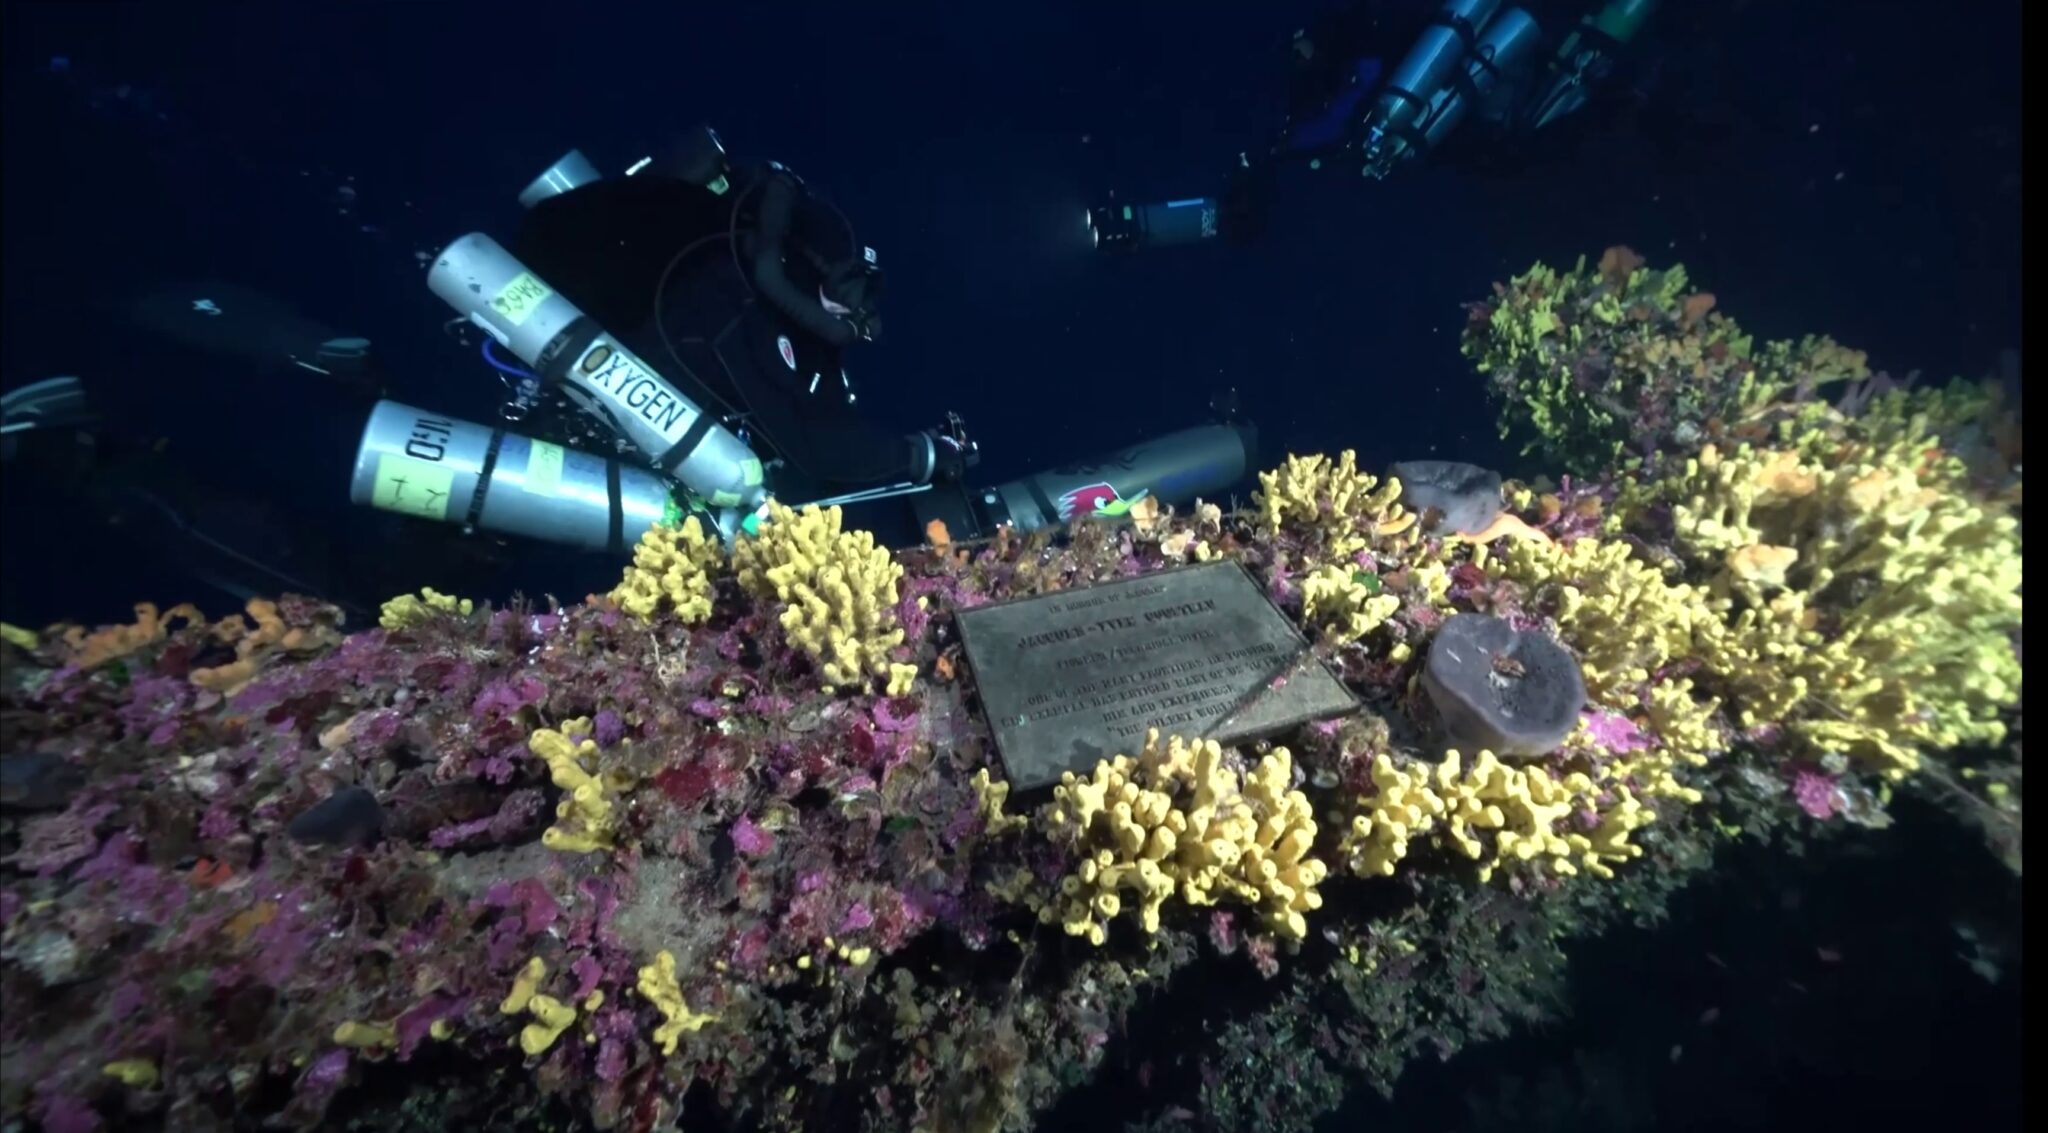 A plate signifying the discovery of this wreck by Jacques Cousteau is pictured as displayed on the Brittanic Shipwreck in Greece